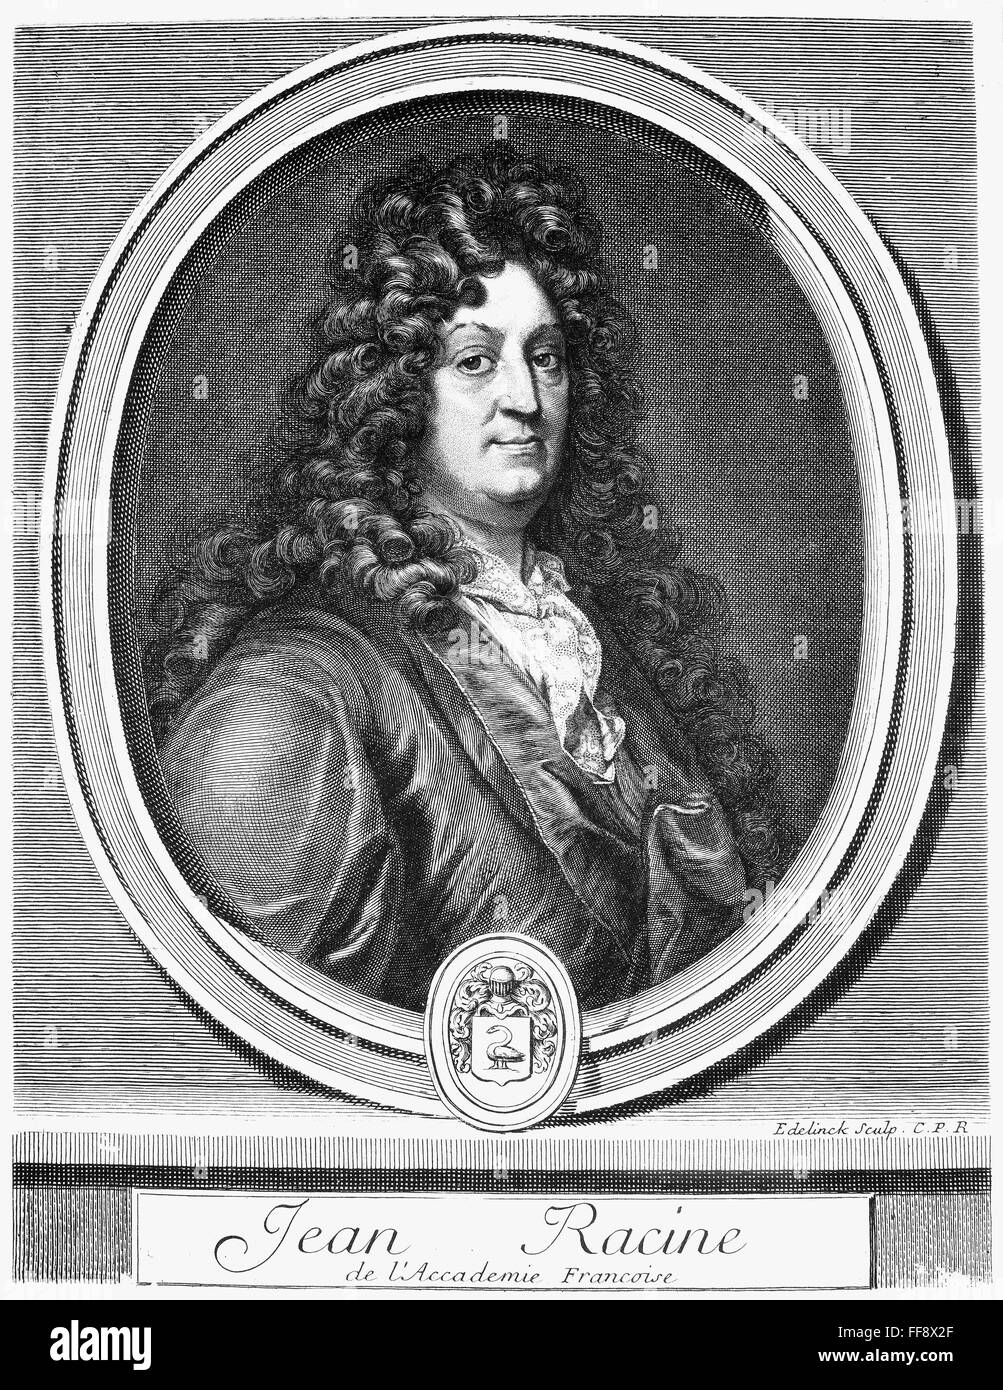 JEAN BAPTISTE RACINE /n(1639-1699). French dramatic poet. Copper engraving by Gerard Edelinck (1640-1707). Stock Photo